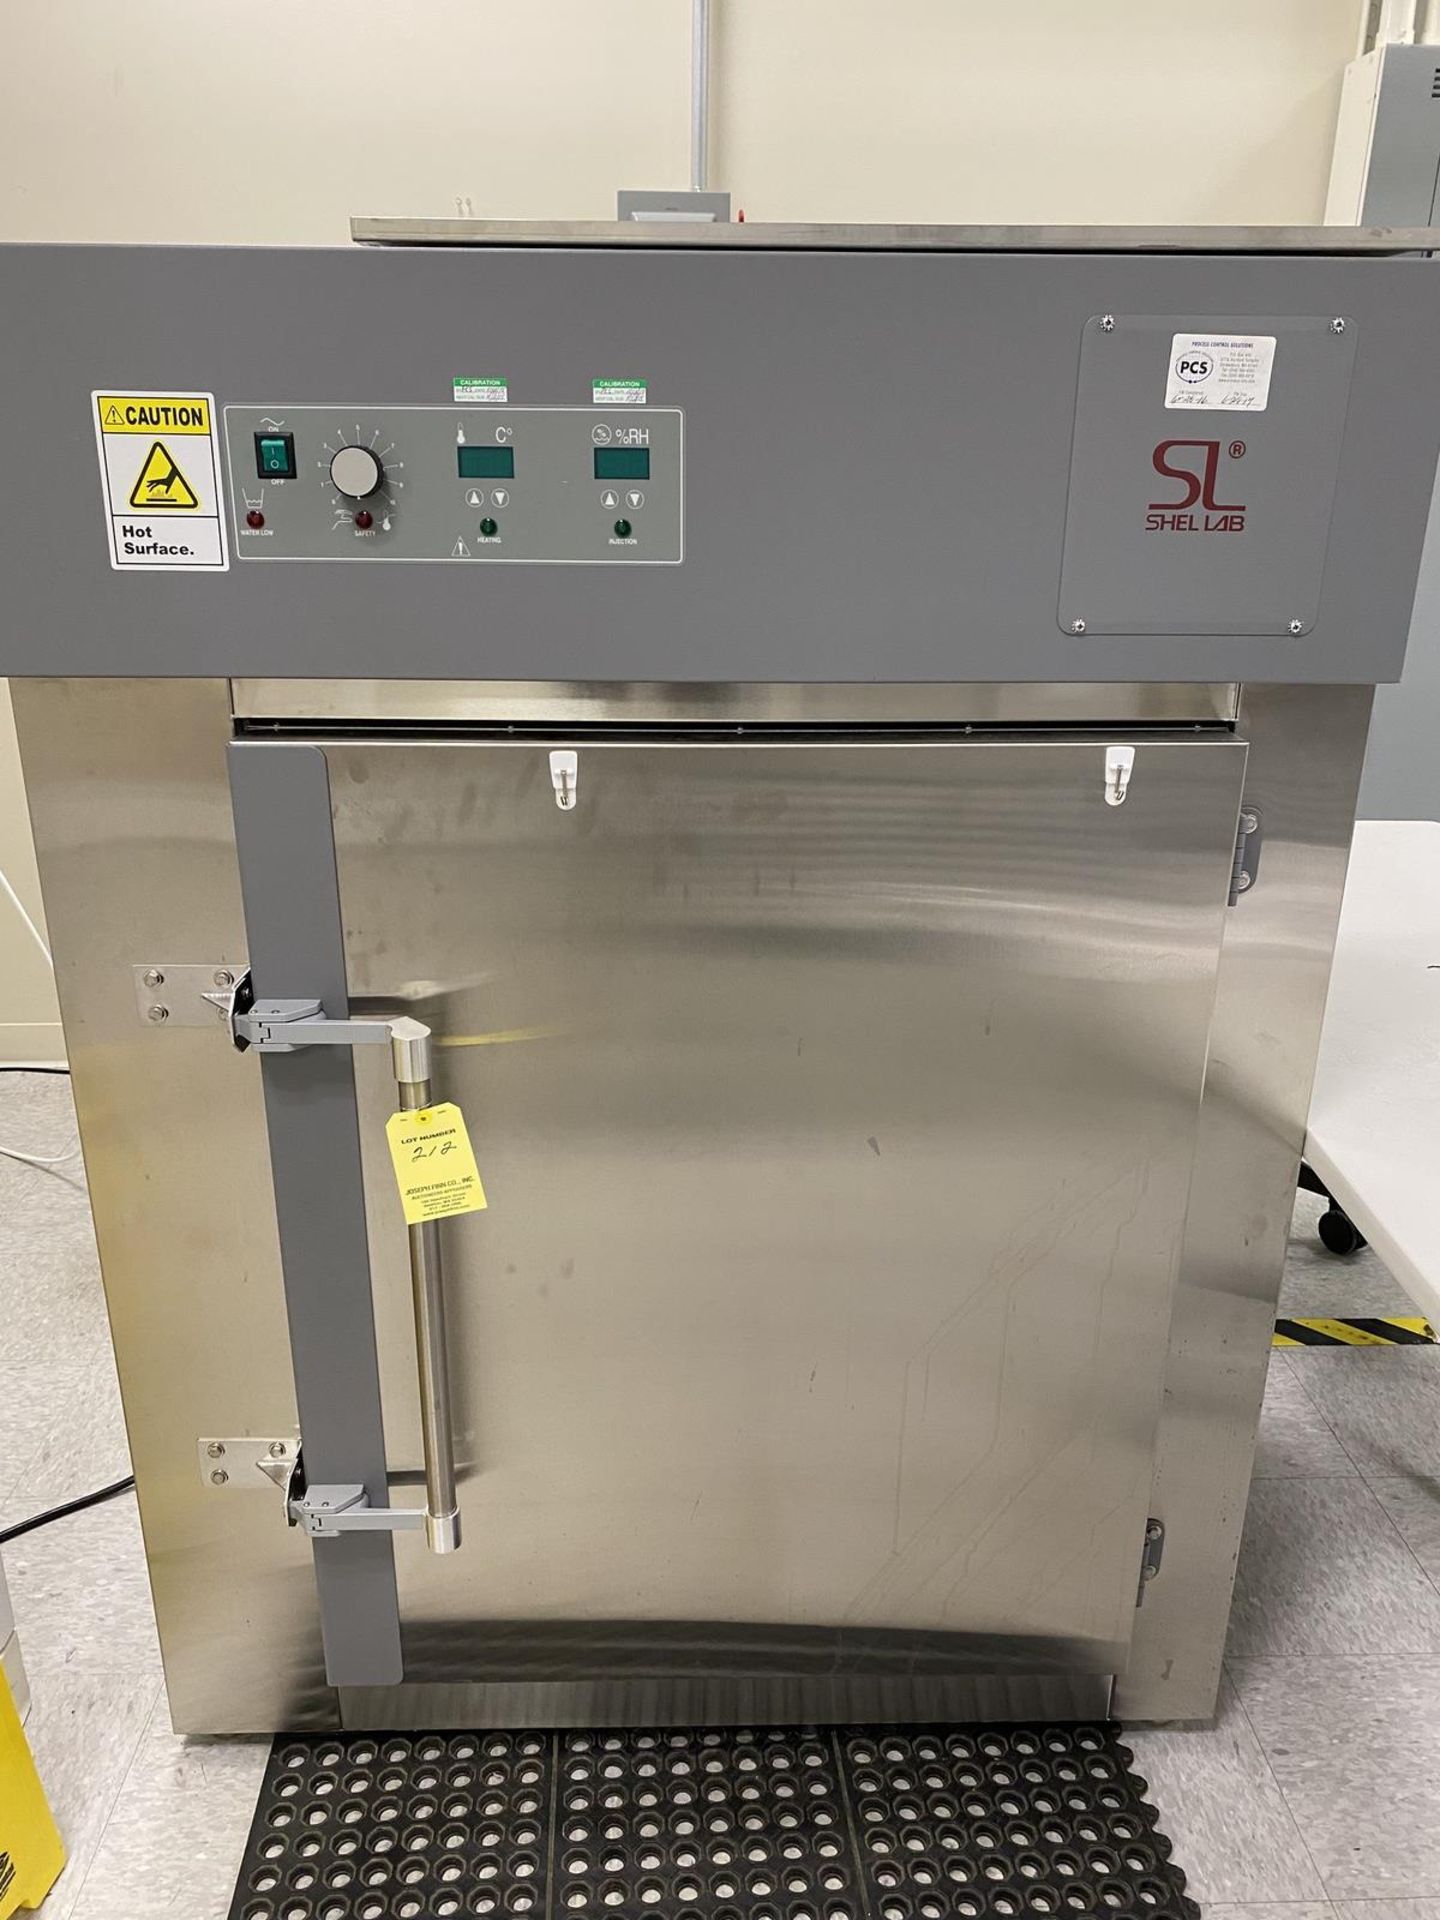 (1) Shell Lab (Sheldon Manufacturing) HC9 9 Cu. Ft. Humidity Test Chamber, s/n 07024813, 28 x 20.25